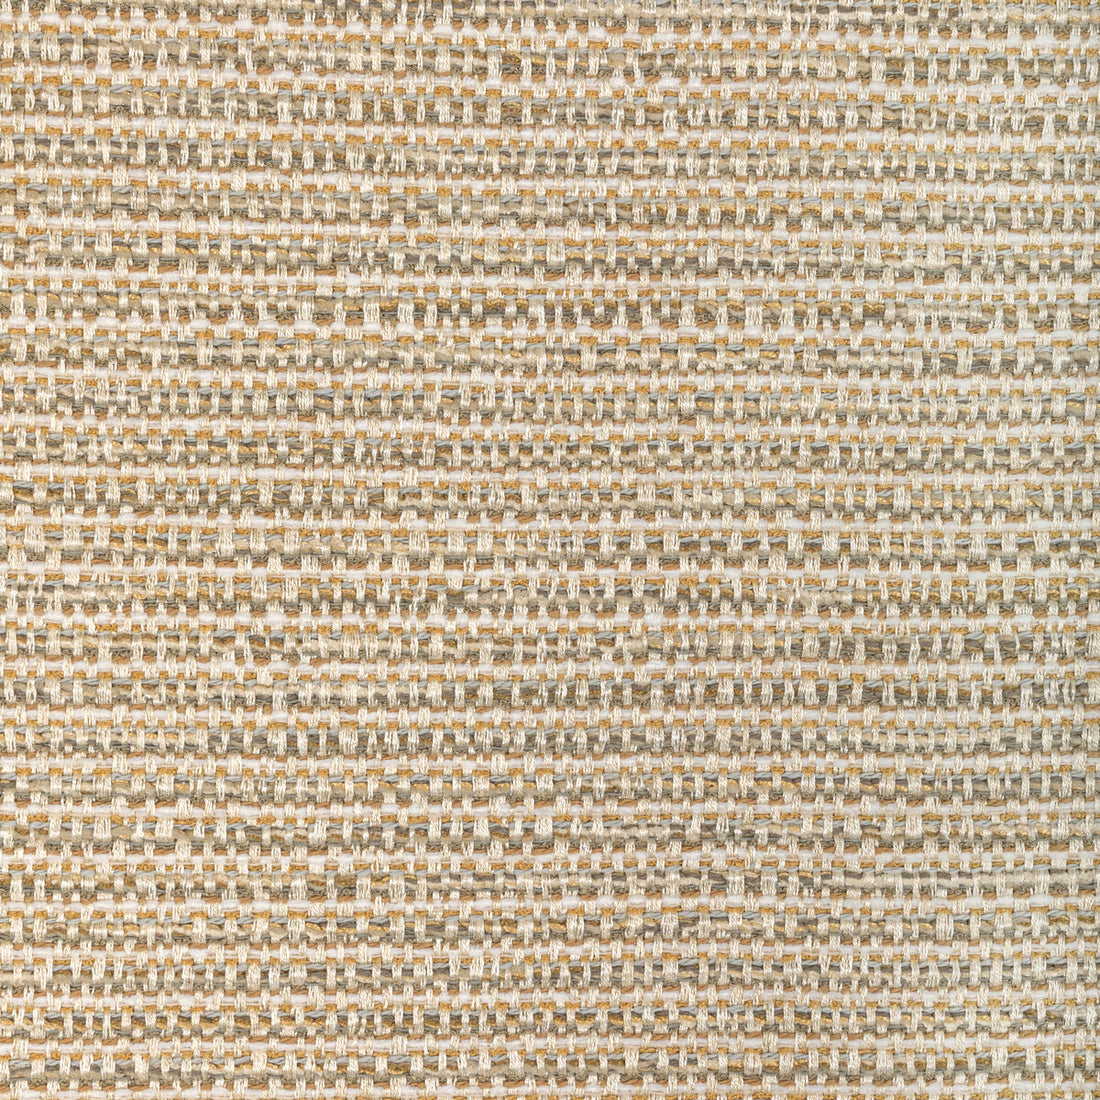 Kravet Design fabric in 36417-411 color - pattern 36417.411.0 - by Kravet Design in the Performance Crypton Home collection